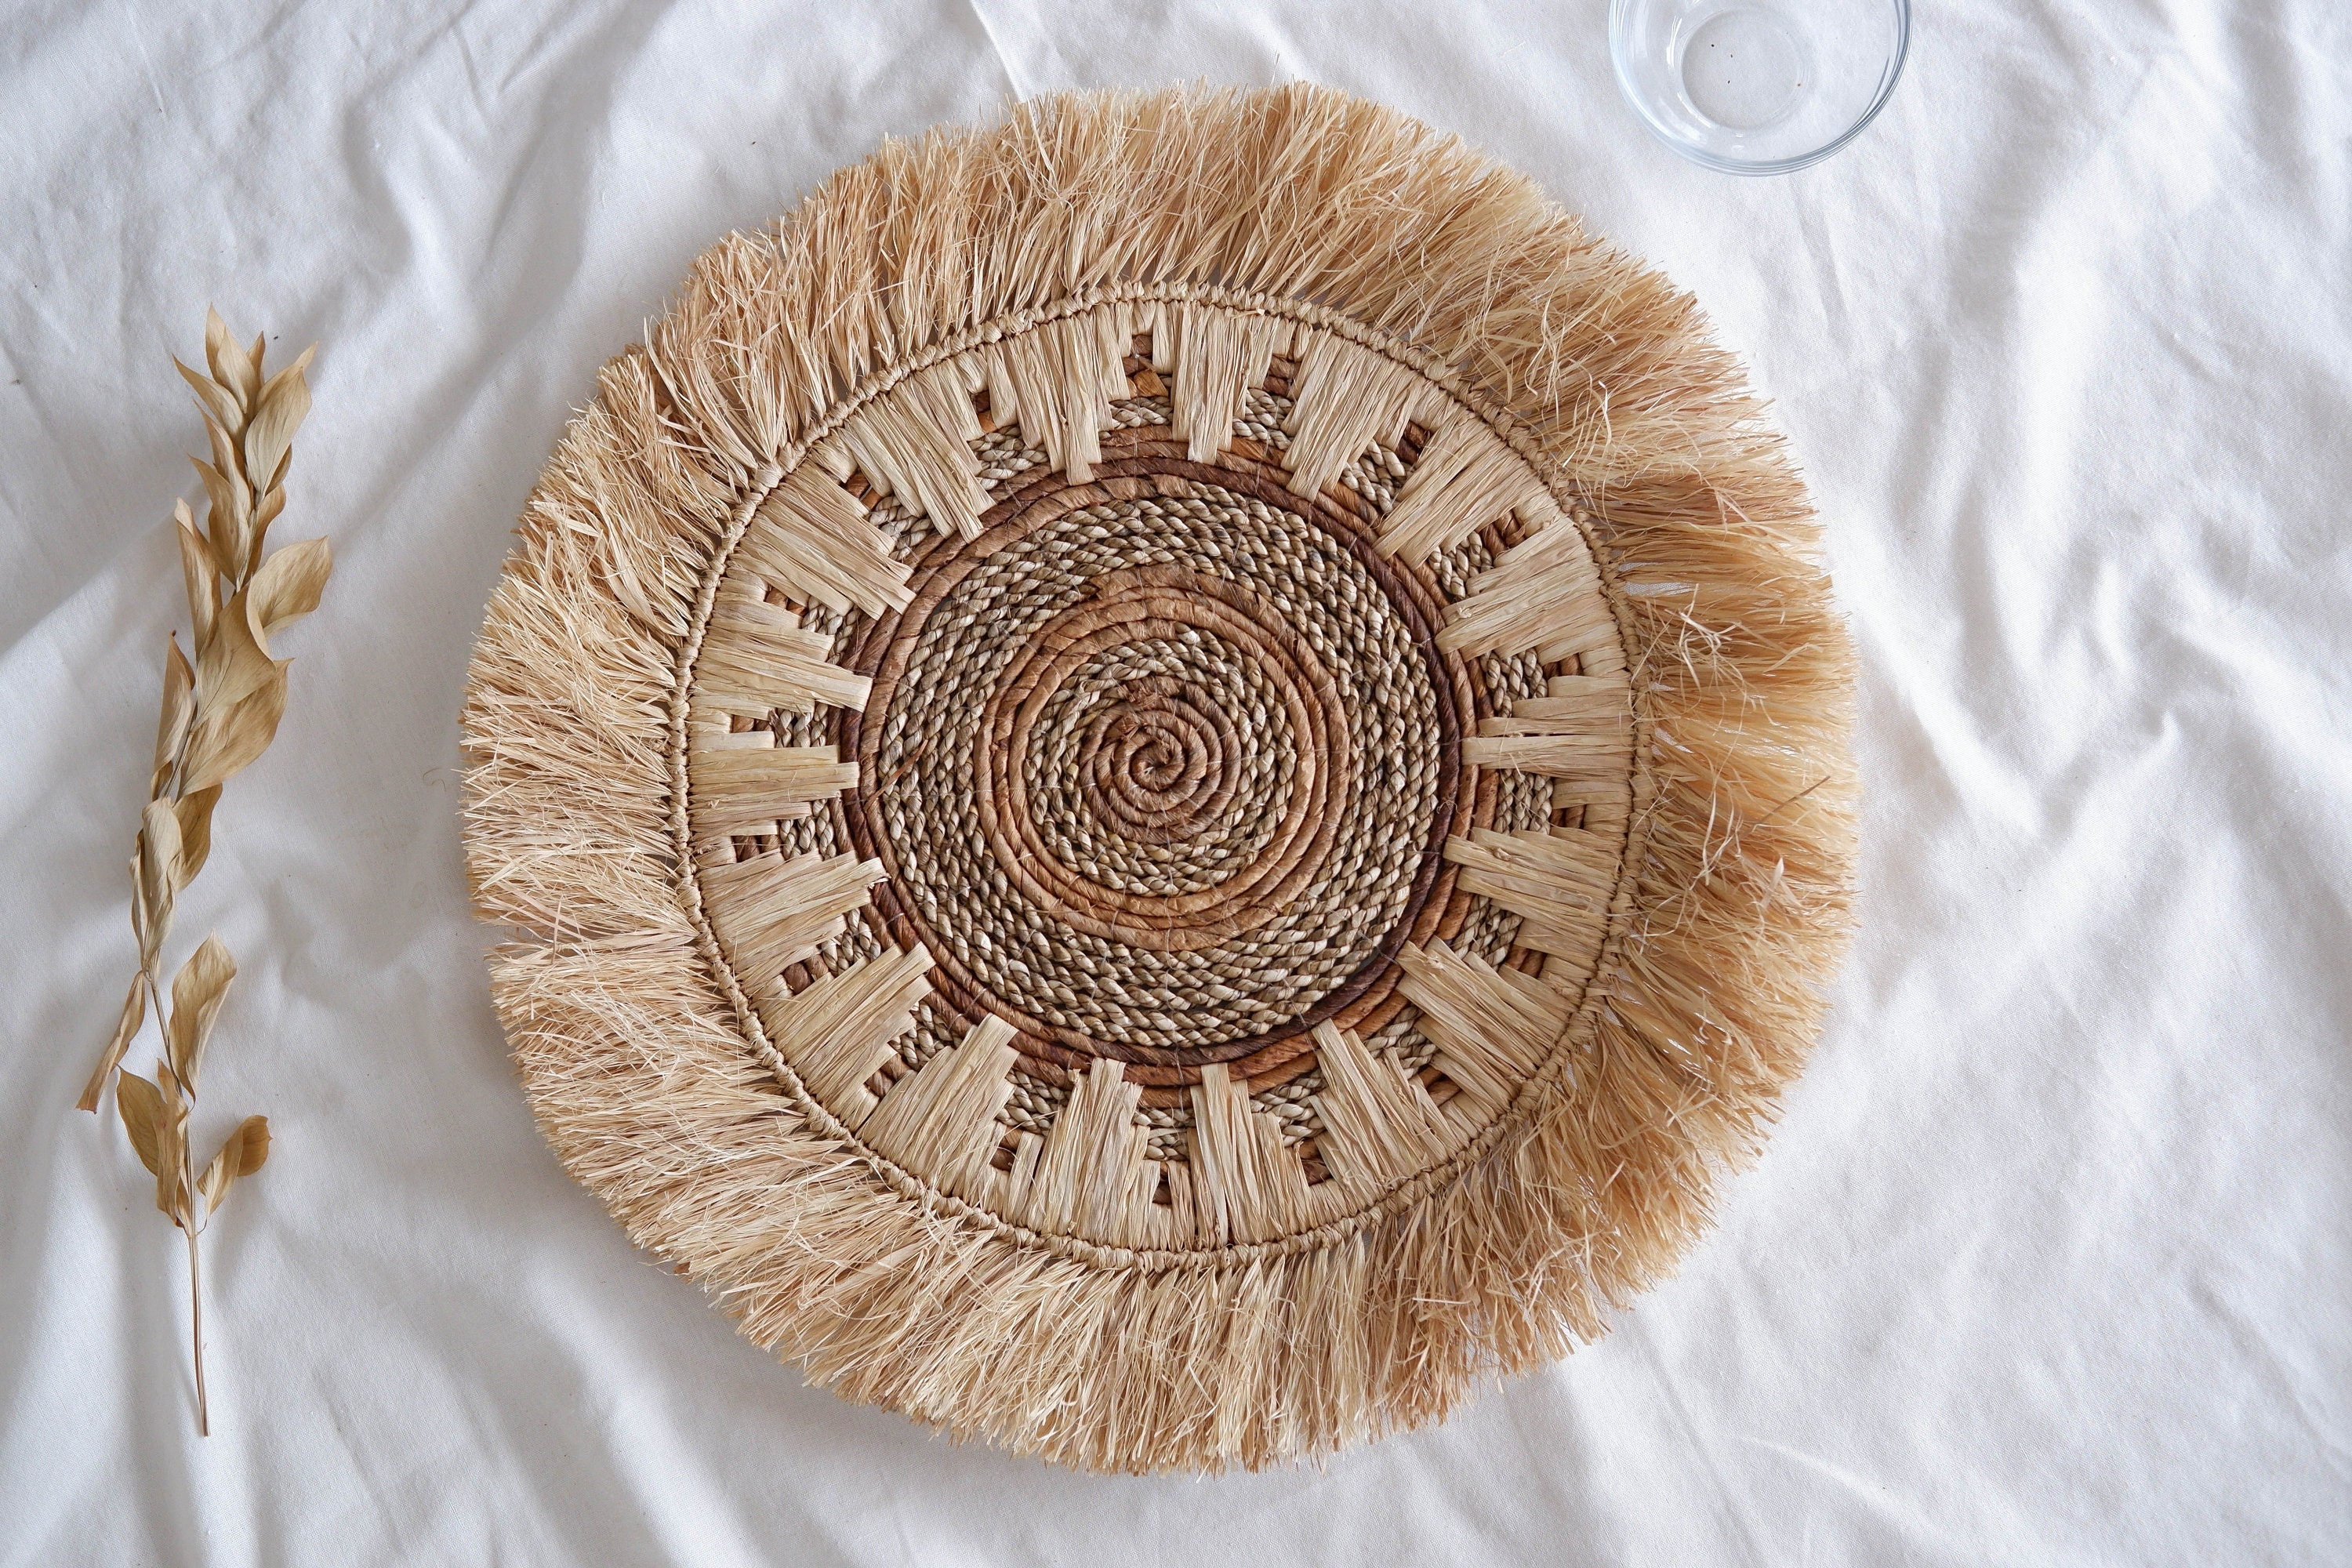 OOKWE Nordic Straw Woven Wall Decor Round Plate Creative Wall